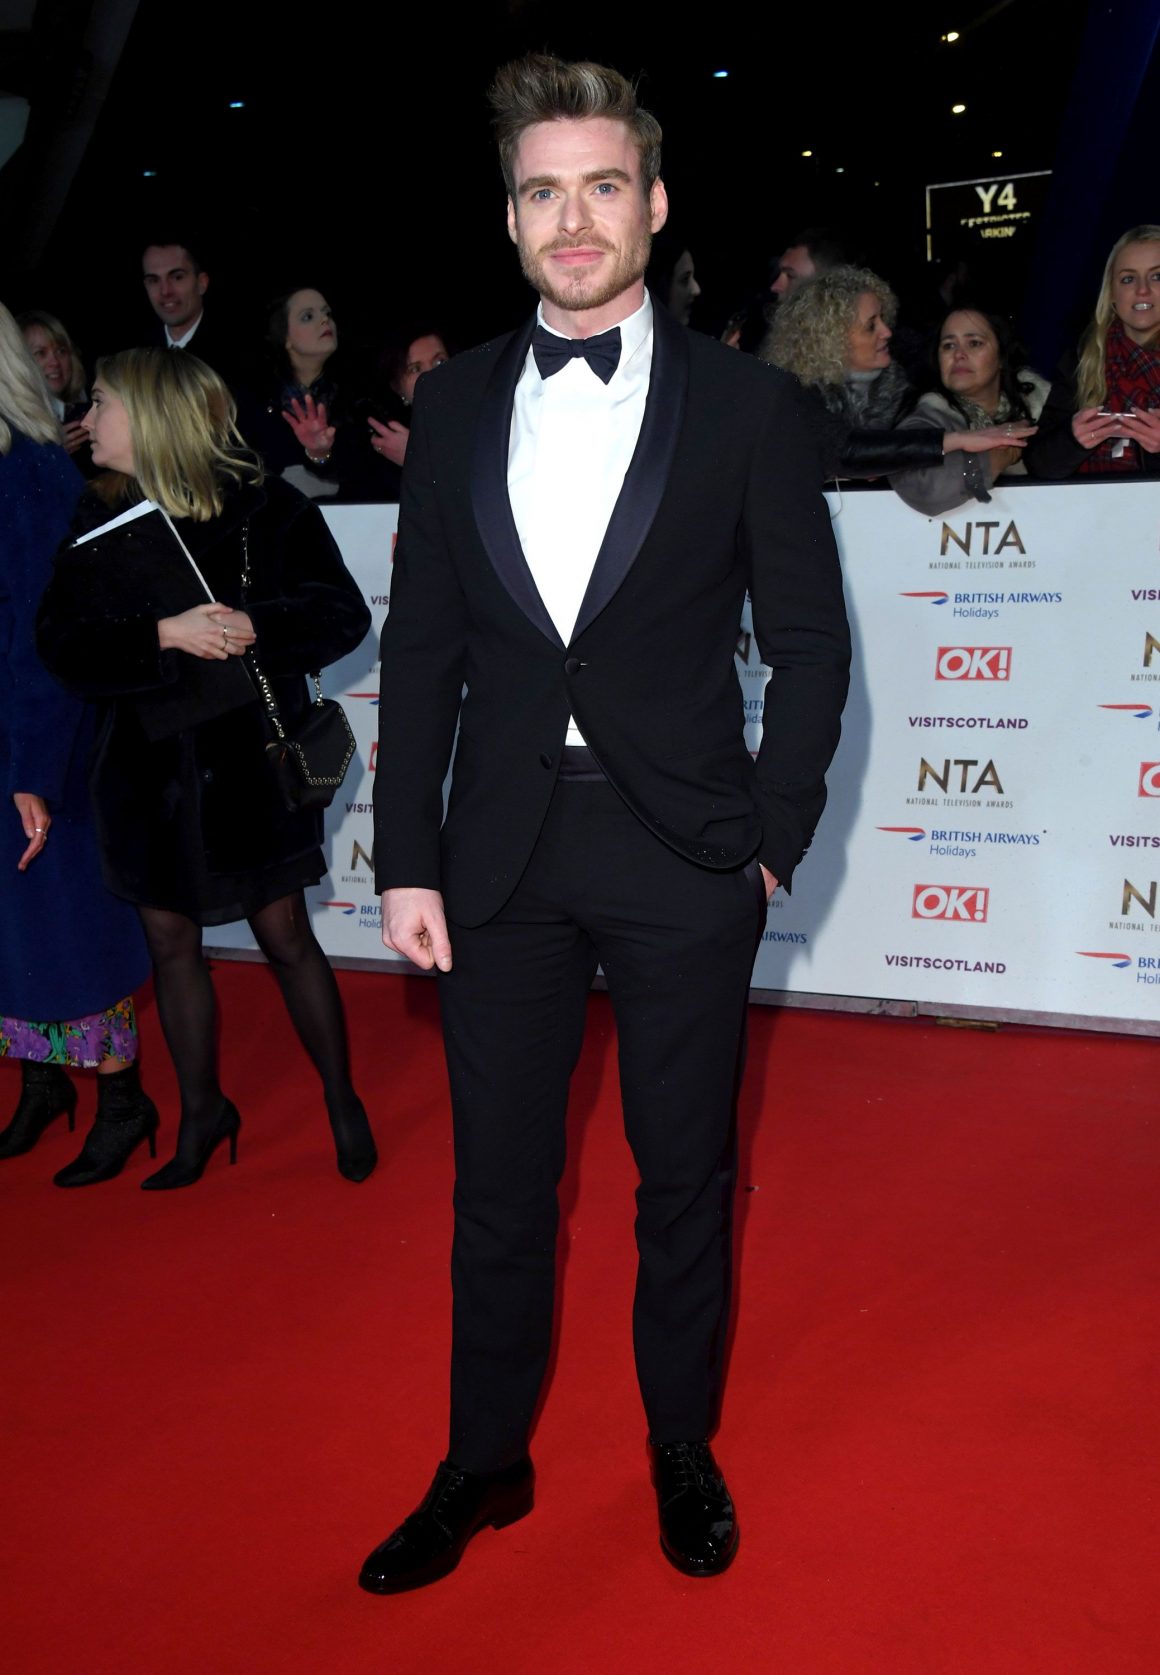 Richard Madden wears a classic, sleek suit to the NTAs